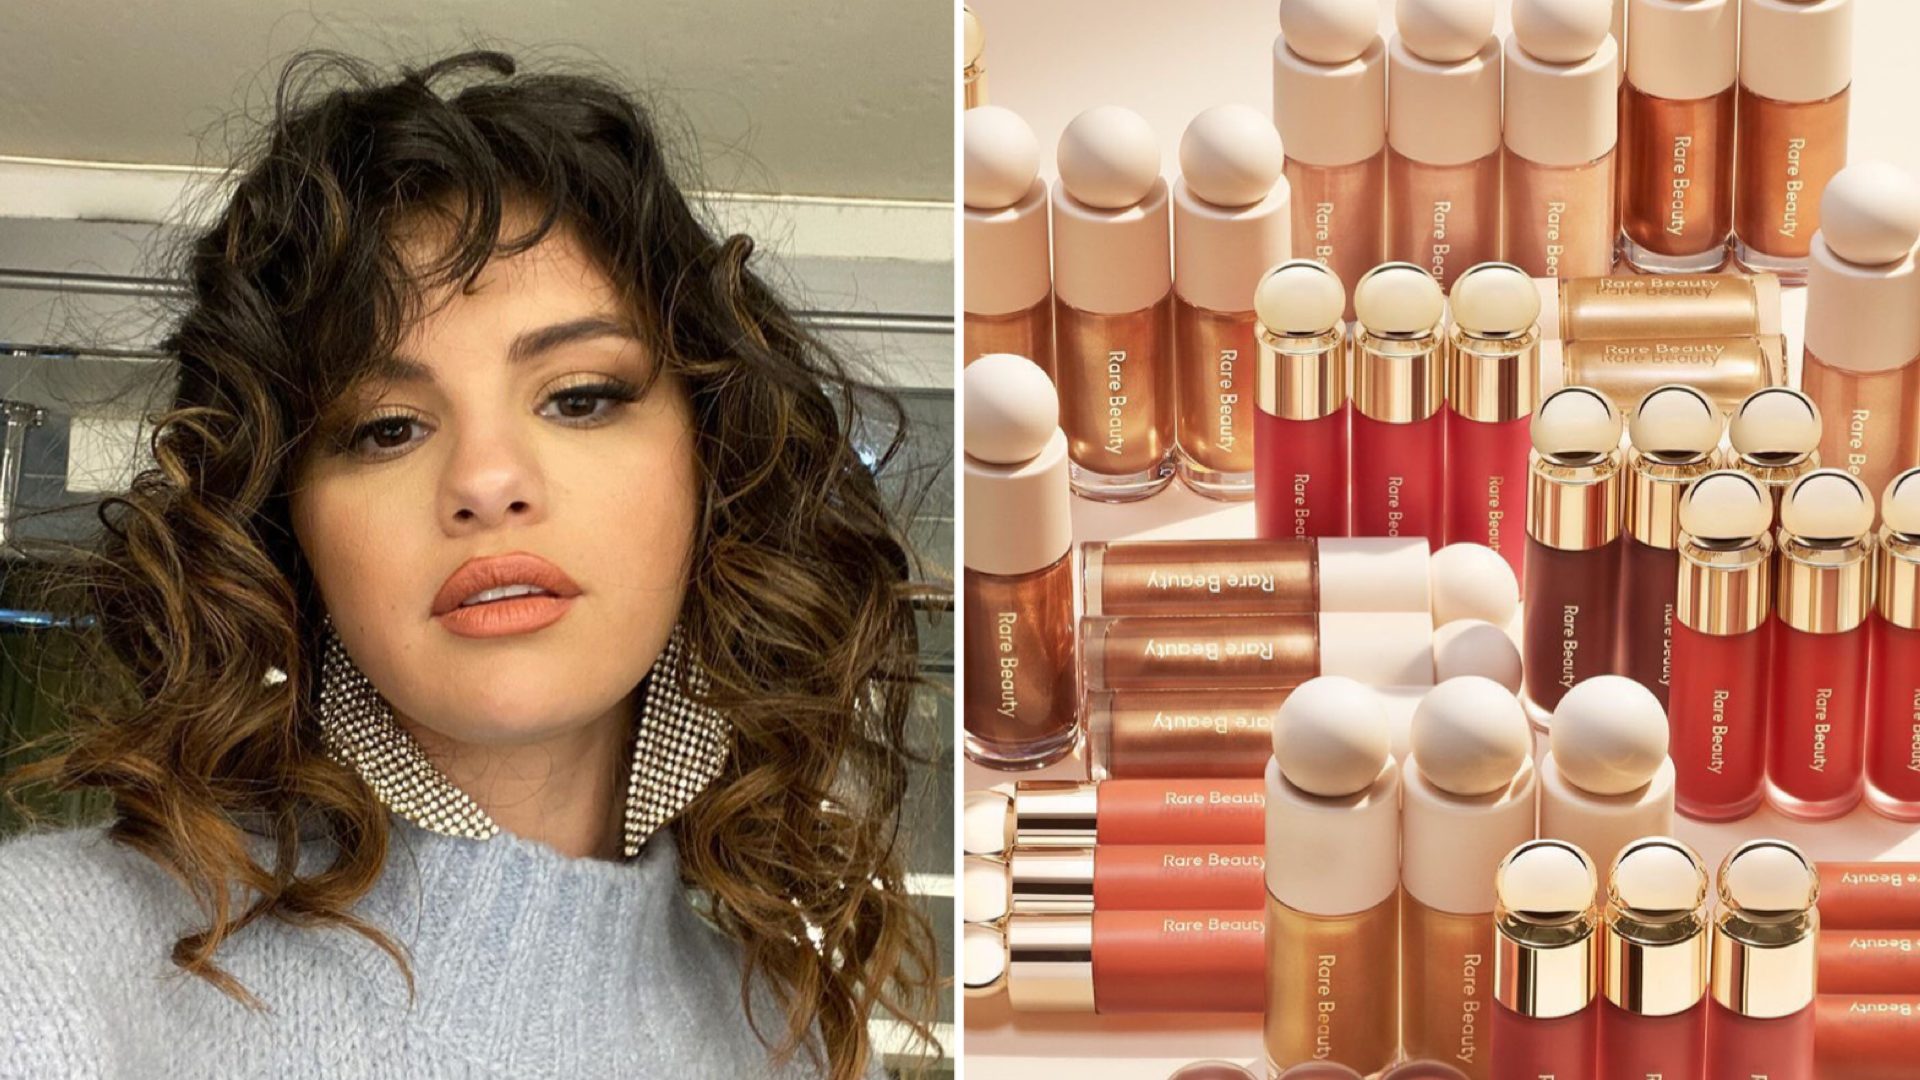 Selena Gomez’s Rare Beauty Line Has Officially Launched